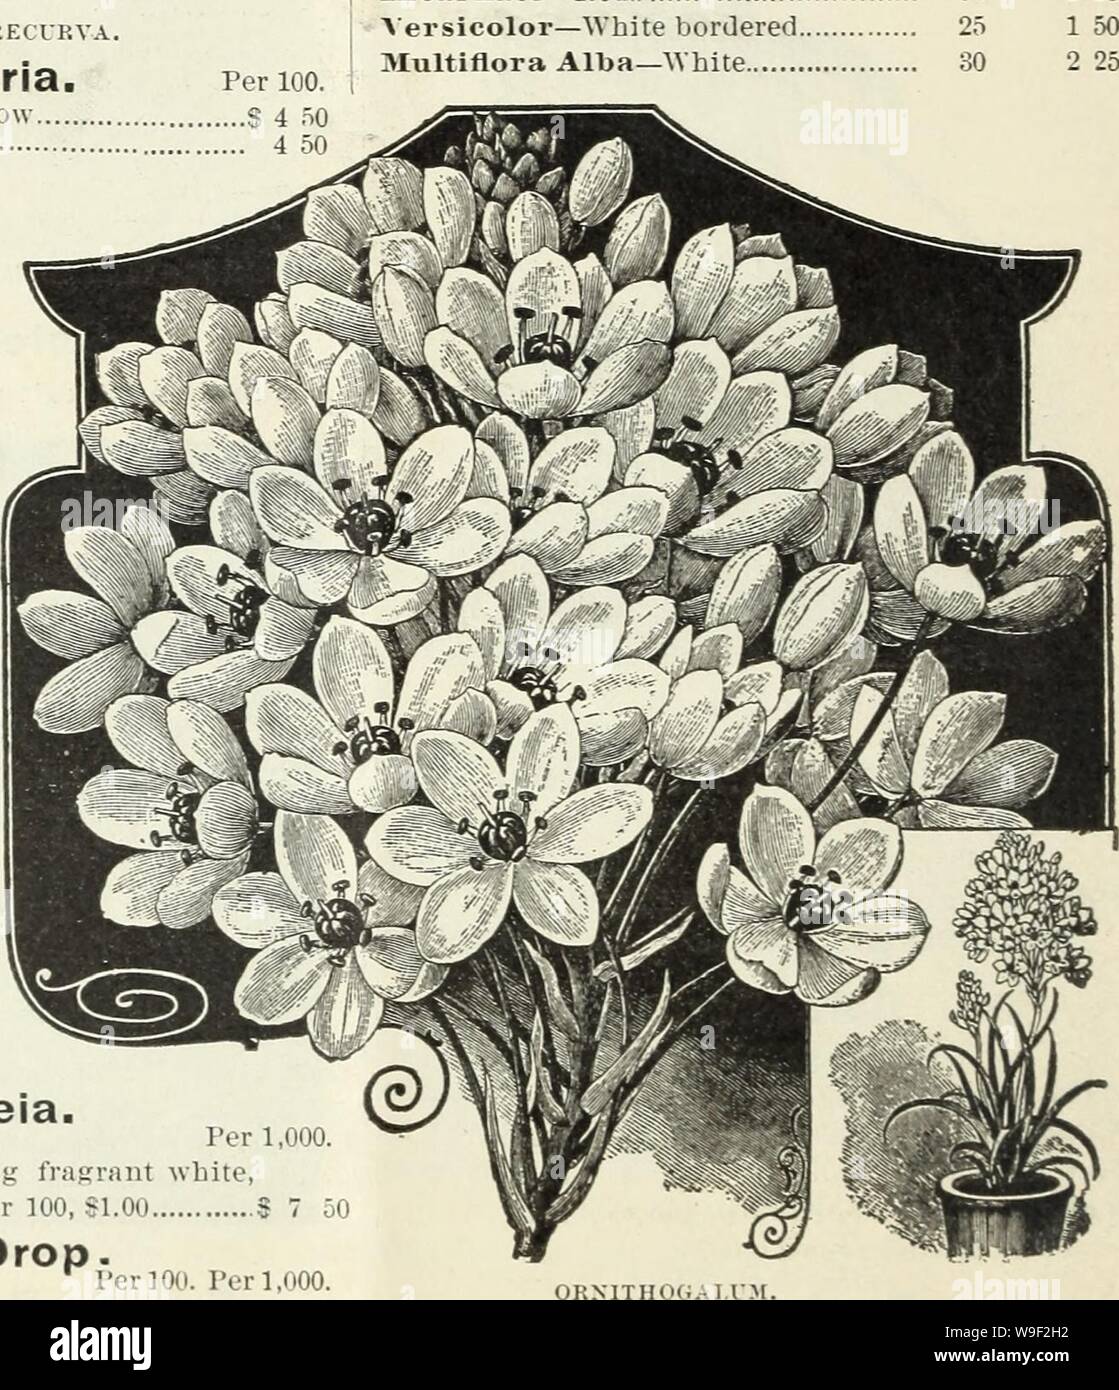 Archive image from page 11 of Currie brothers' wholesale catalogue . Currie brothers' wholesale catalogue : bulbs, seeds, and florists' supplies  curriebrotherswh18curr Year: 1892 ( FRITILLARIA RECUKVA Fritillaria. Lanceolata—Greenish yellow Kecurva—Crimson Ornithogalum. Per 100. Per 1,000. Arabicum S2 00 SIT 00 Ranunculus. Per 100. Double—French S 60  Persian GO ' Turban 75 Scilla. Per 100. Companxilata—Blue: per doz., 25c S2 CO Hyacintboides Coe- rulea — Blue; per doz., 25c 2 00 Hyacintboides Alba — White; per doz., 45c 3 00 Hyacintboides Rosea—Rose 8 00 Siberica —Blue; i)er doz., 15c 7) per Stock Photo